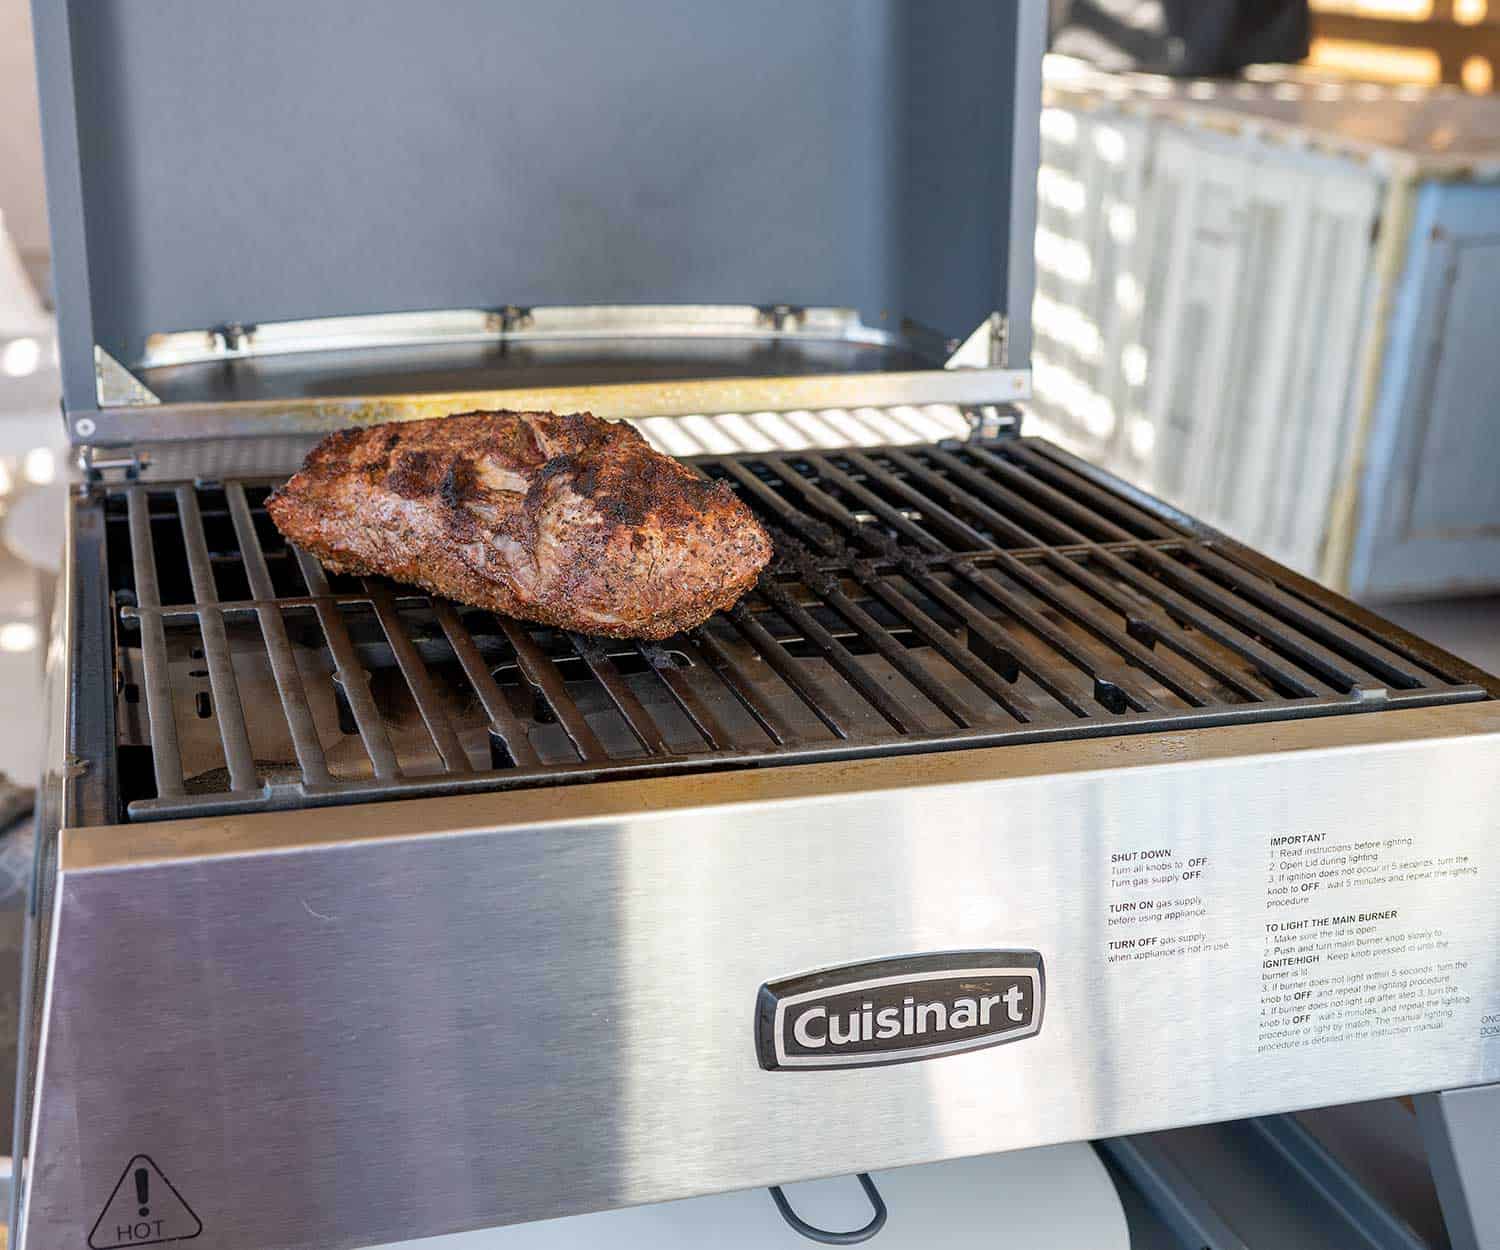 Cuisinart 3-in-1 Pizza Oven Plus grill with tri-tip.